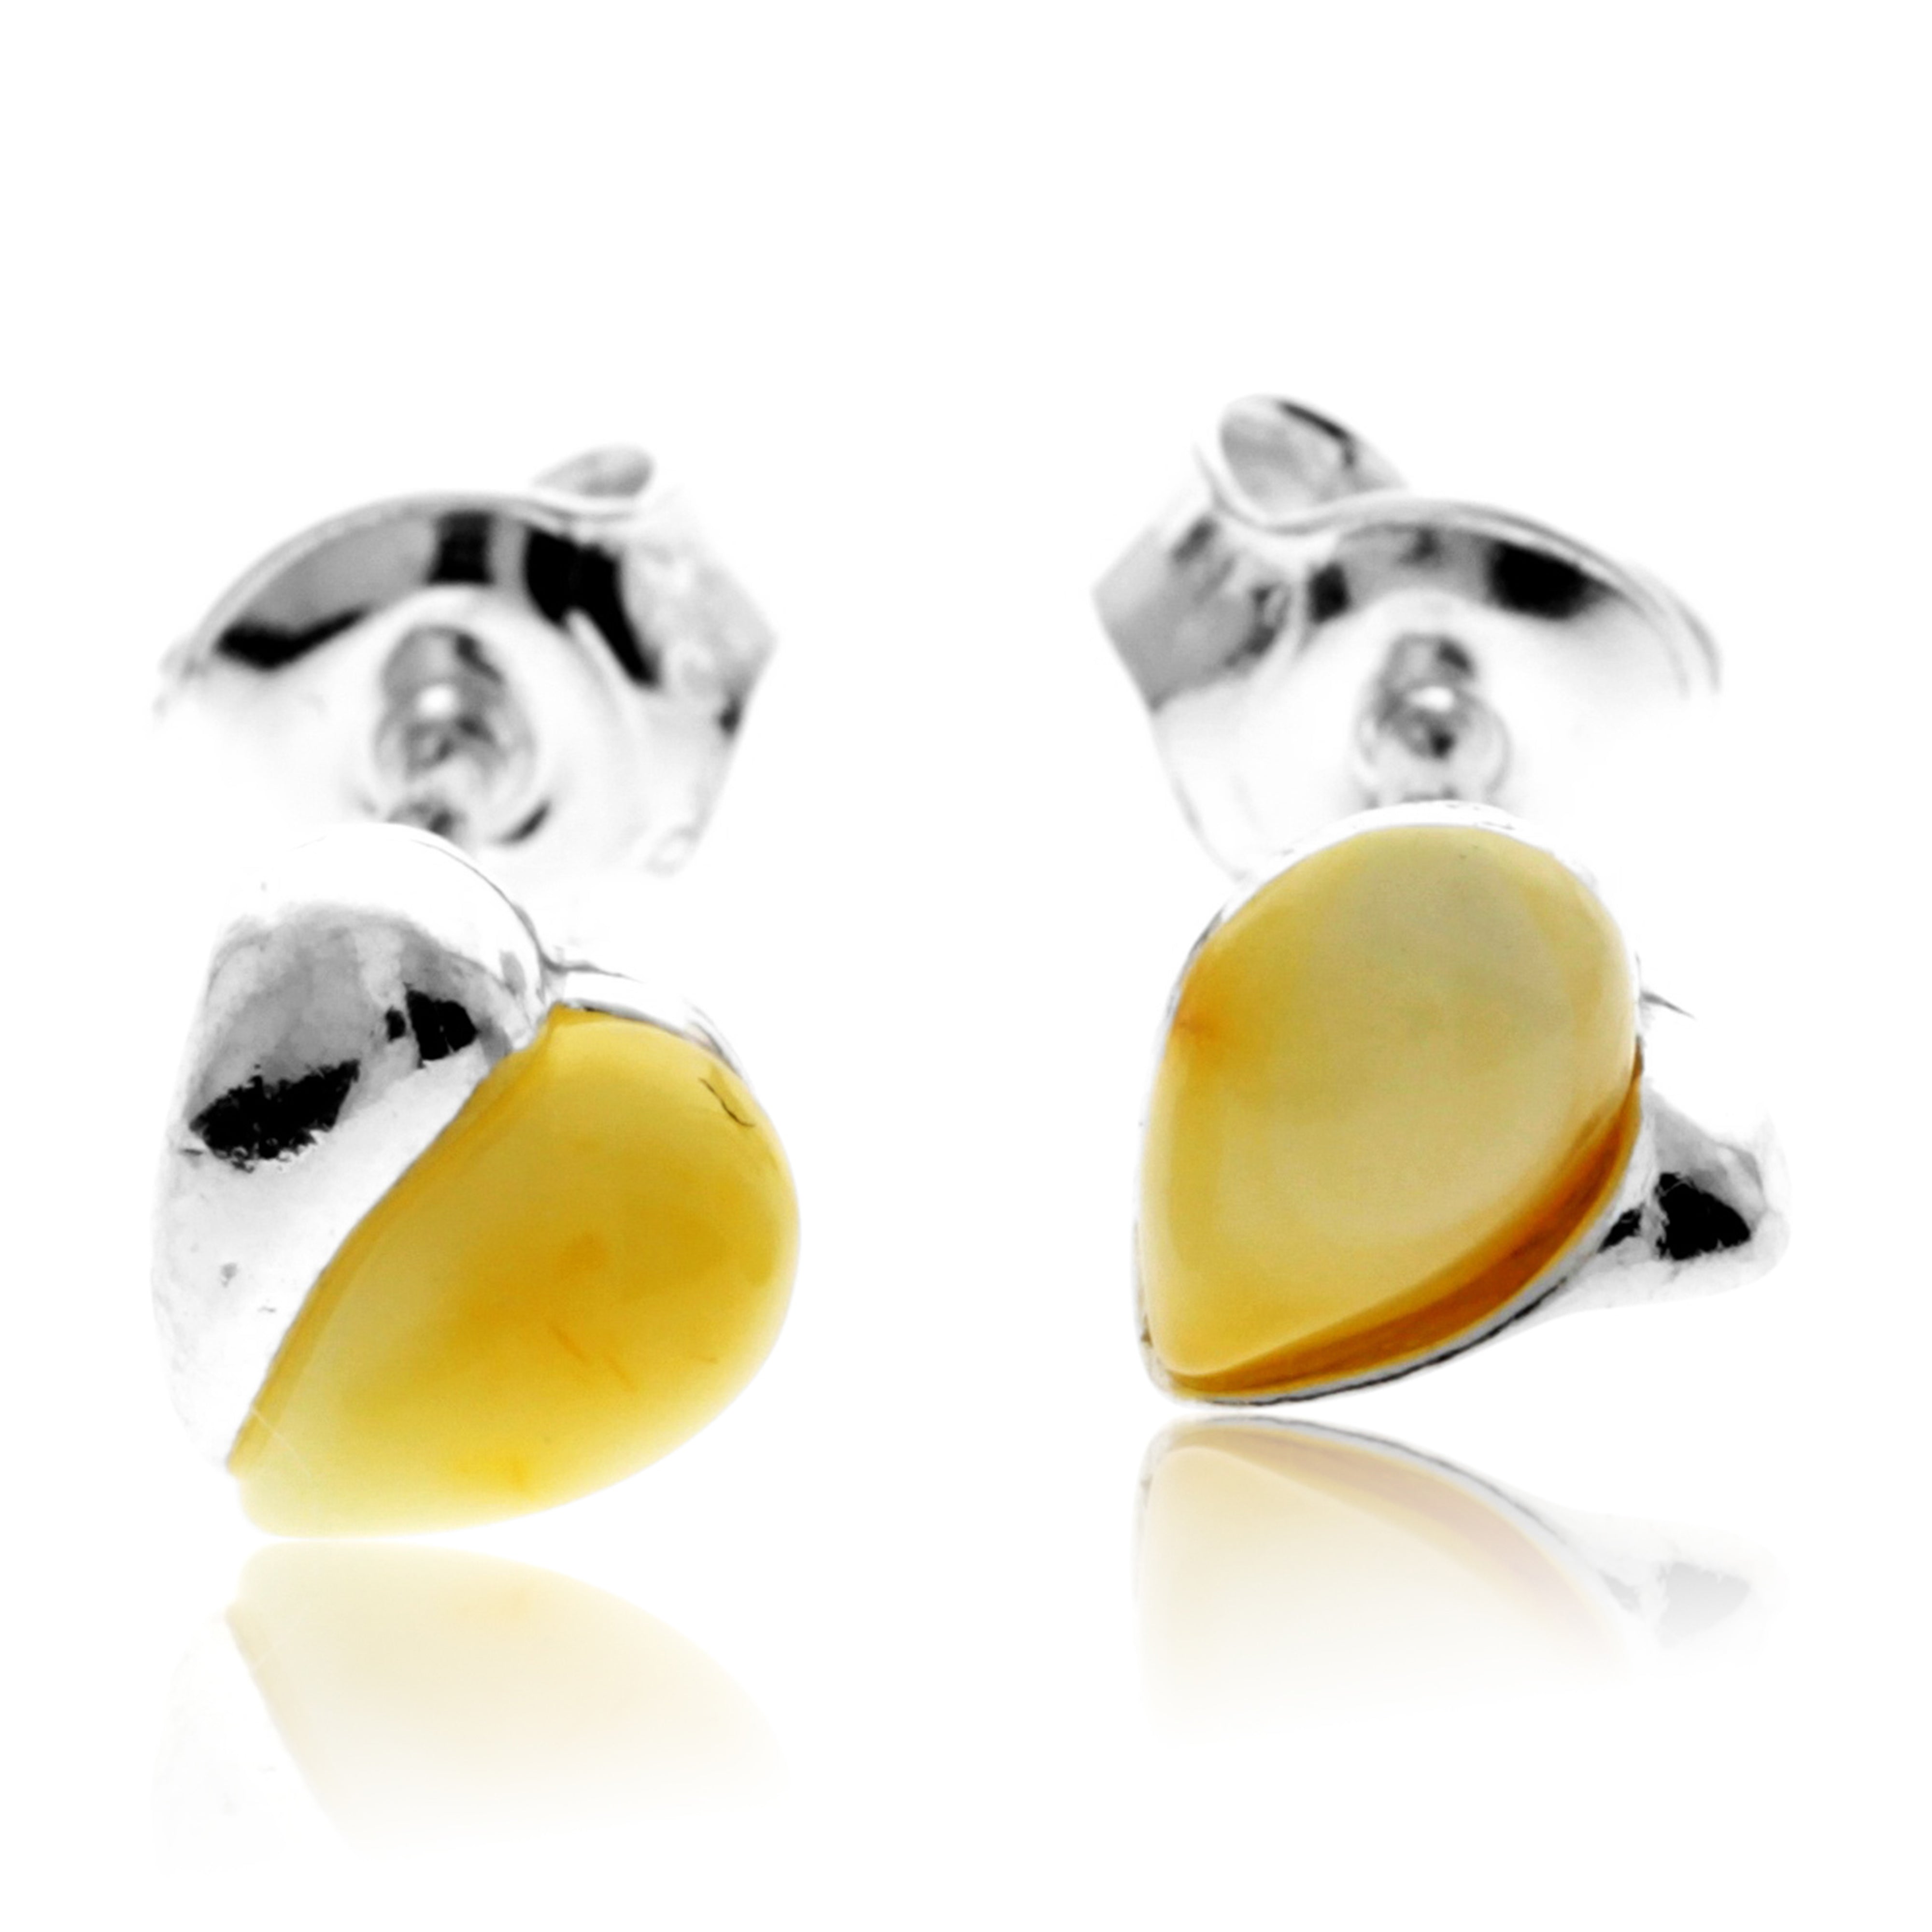 925 Sterling Silver & Genuine Baltic Amber Small Hearts Studs Earrings - GL011